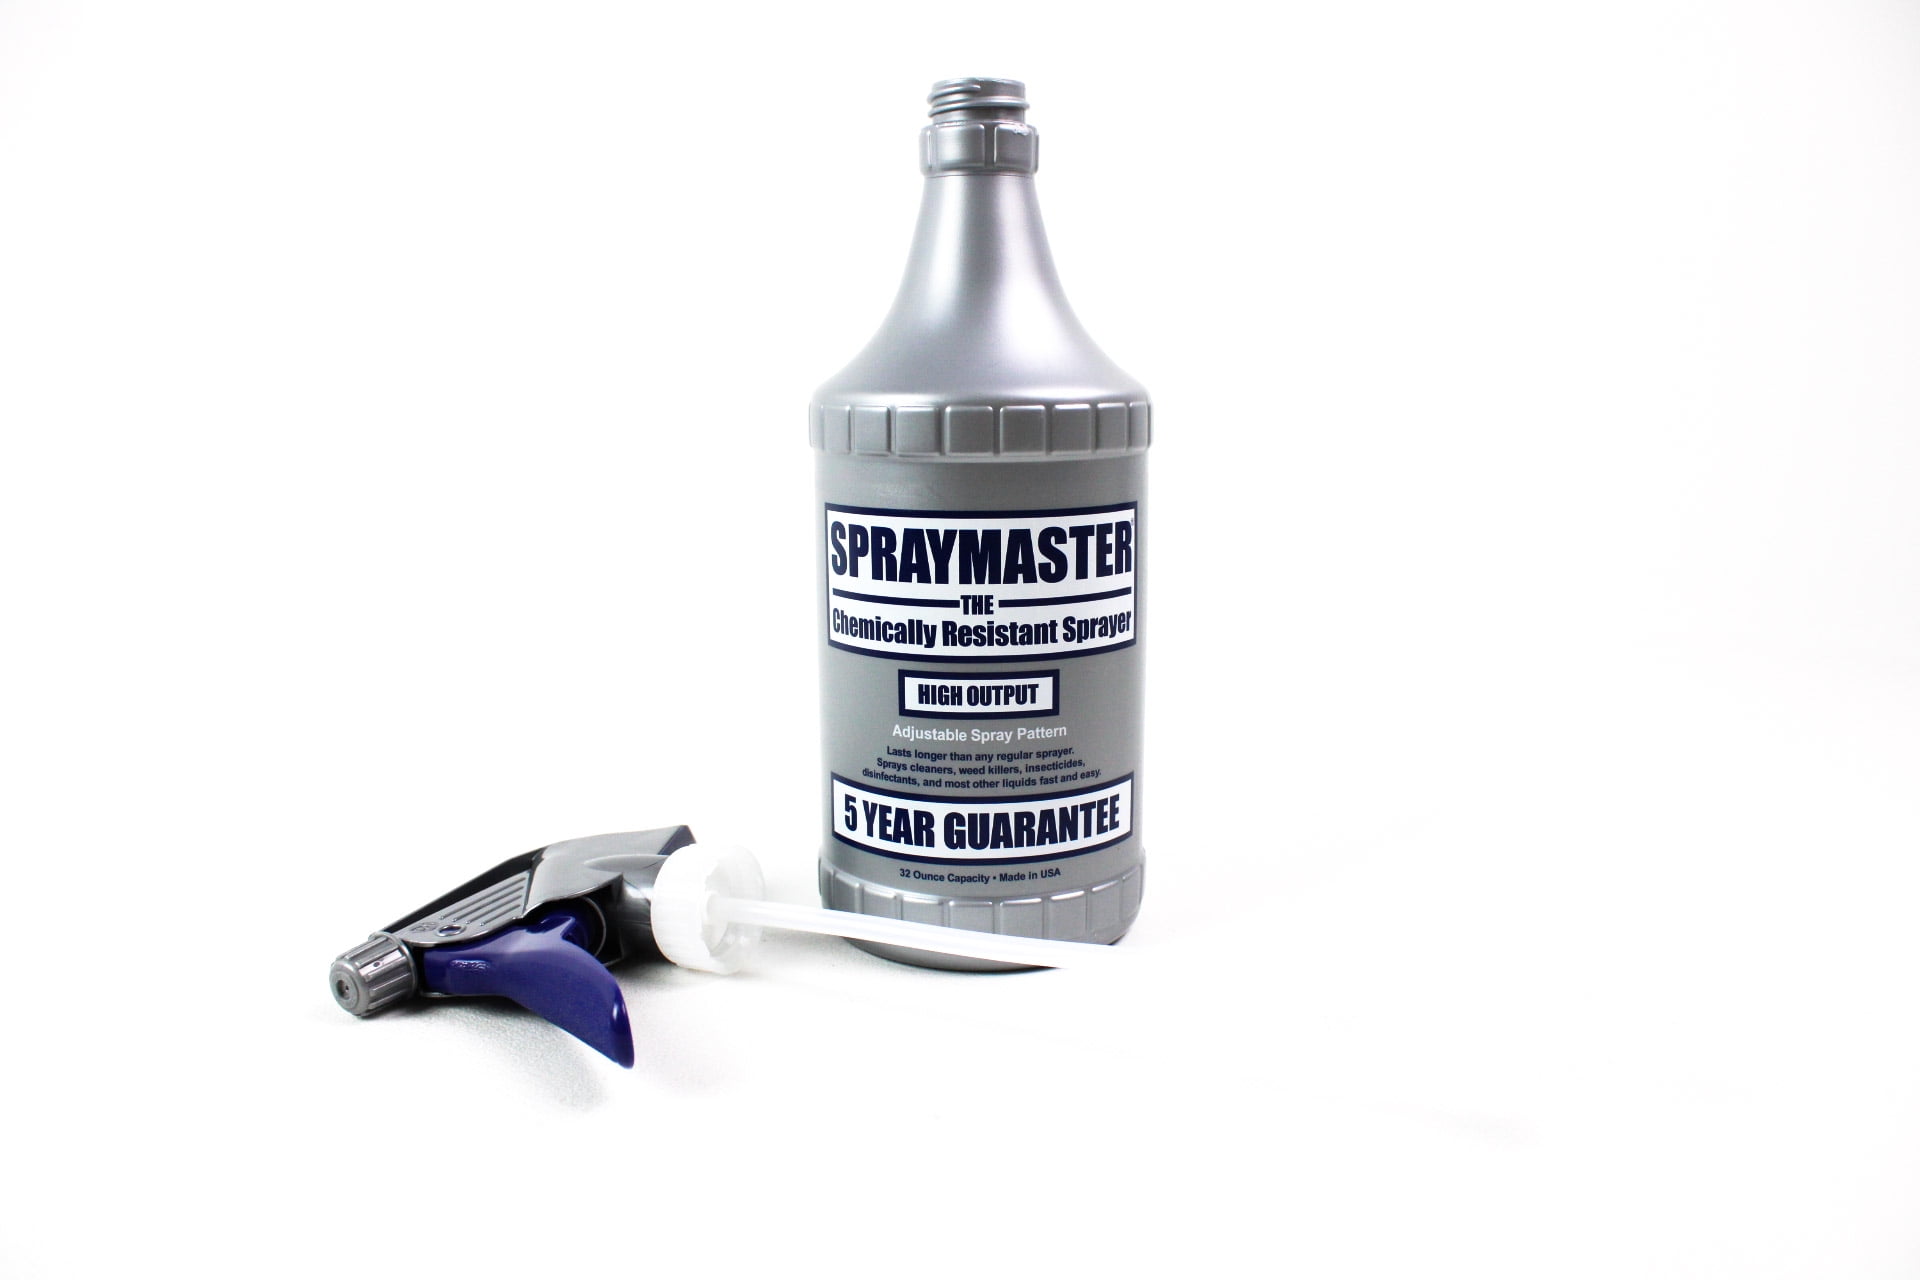 Consolidated SprayMaster Spray Bottle with Acetone Resistant Leakproof Sprayer, HDPE, Gray, 32oz, 12 Pack